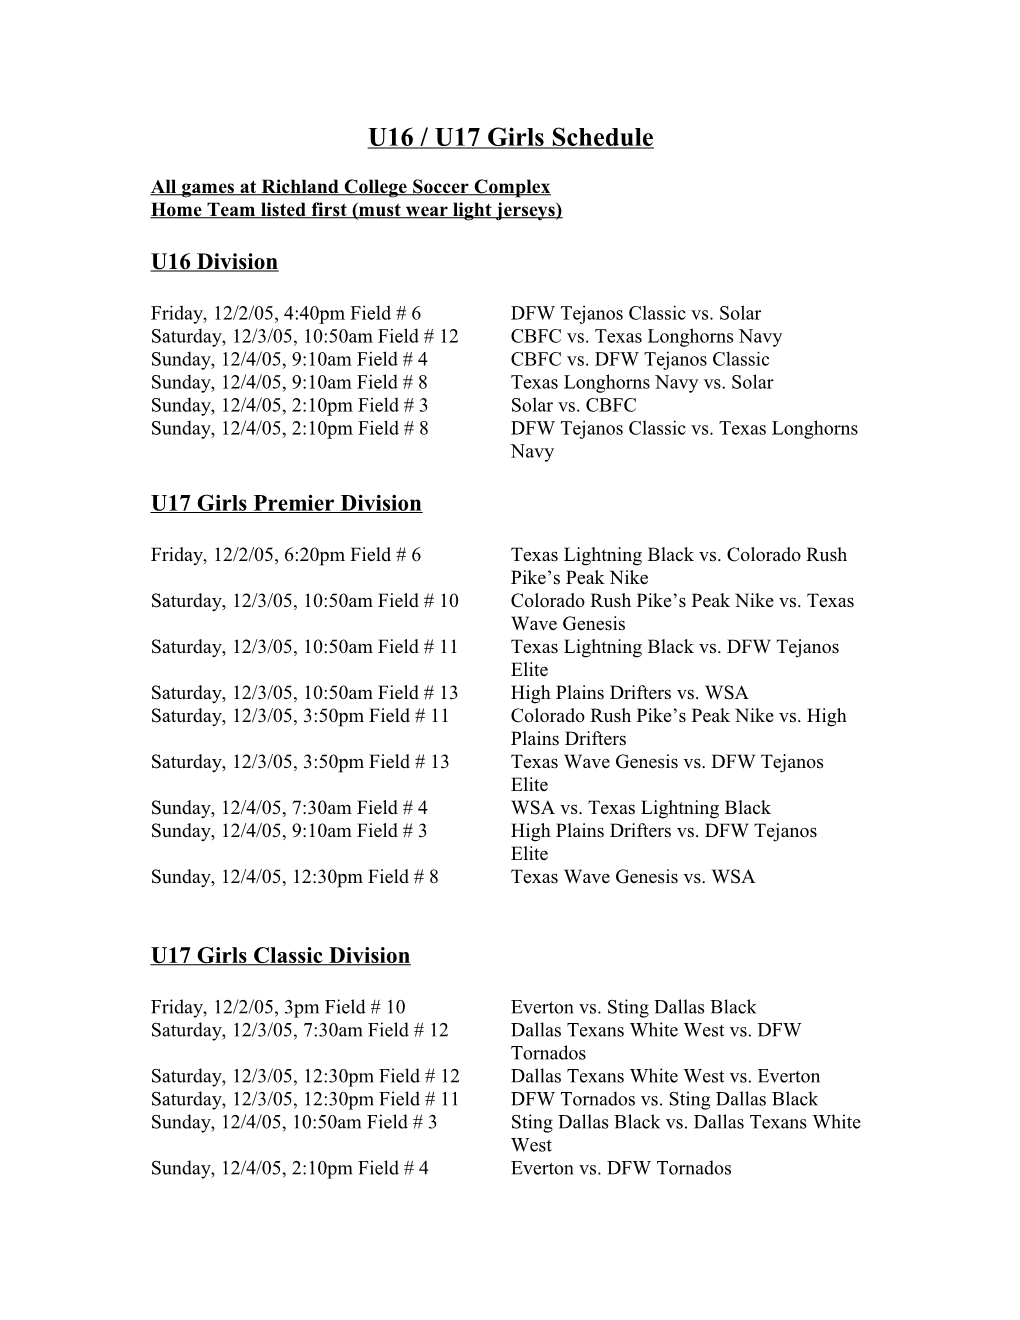 All Games at Richland College Soccer Complex